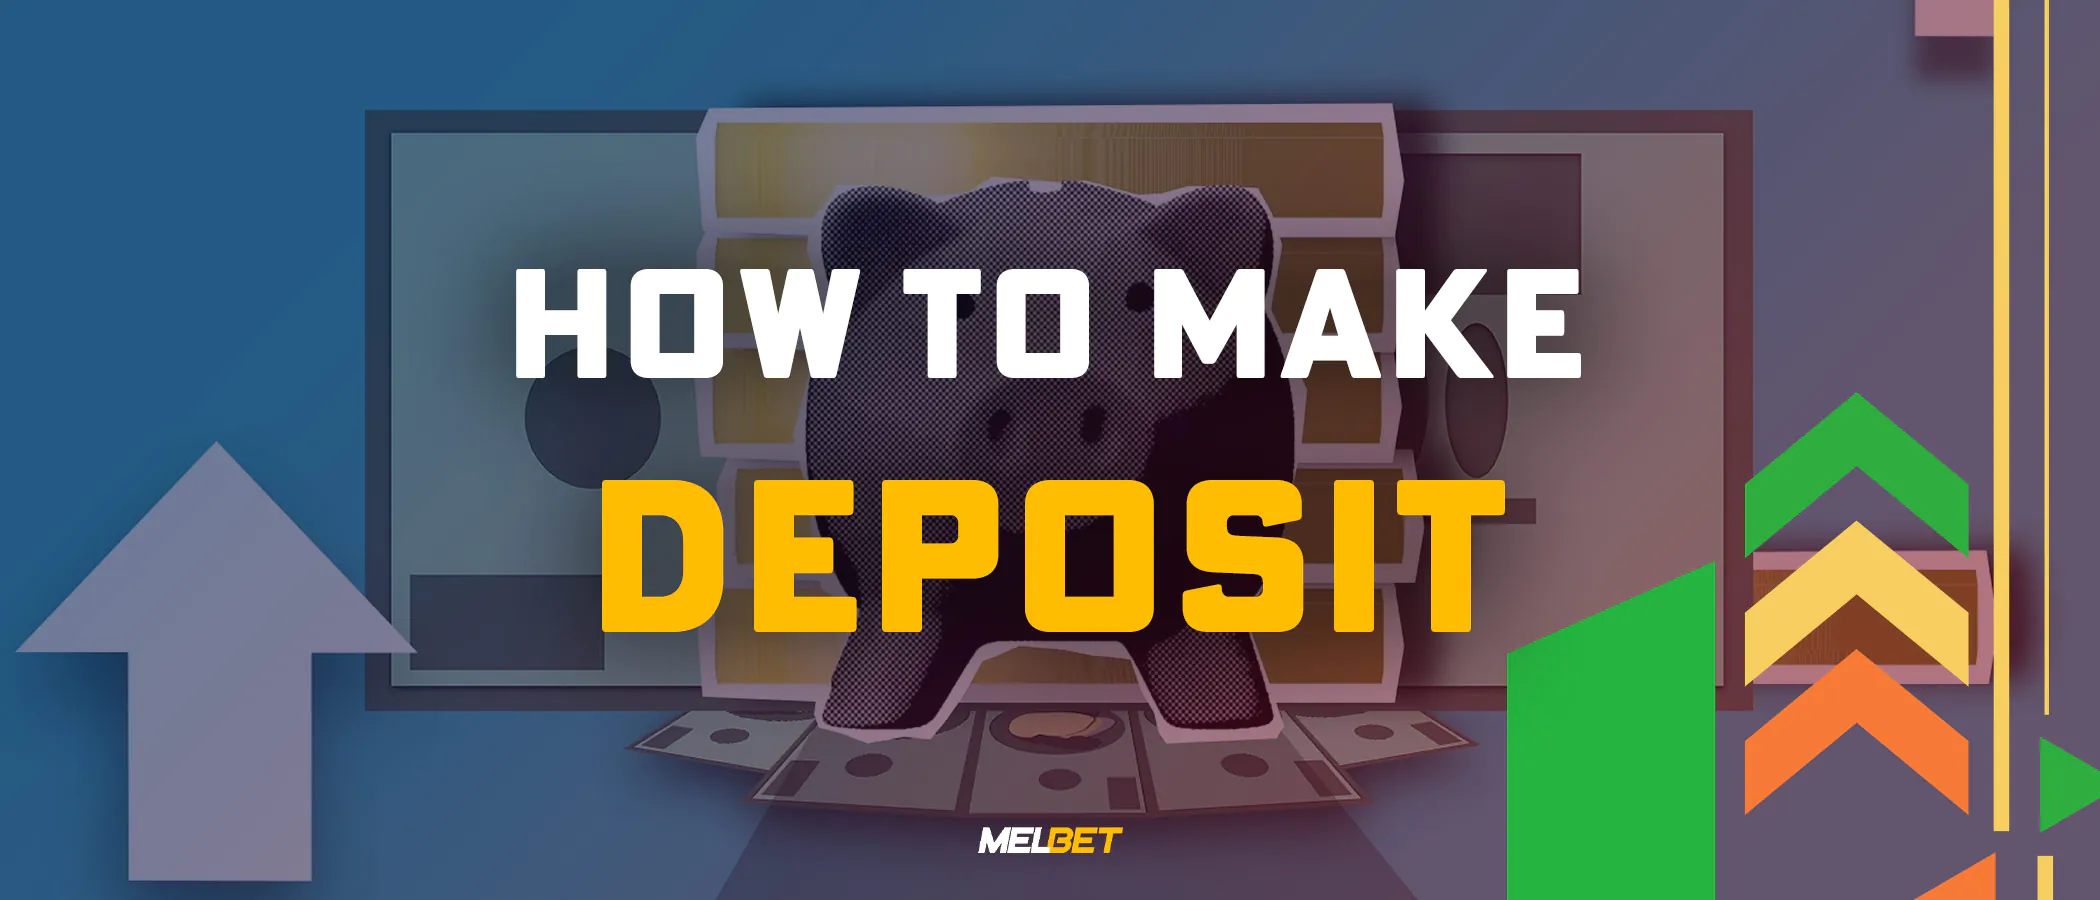 How To Make The First Deposit at Melbet Sportsbook